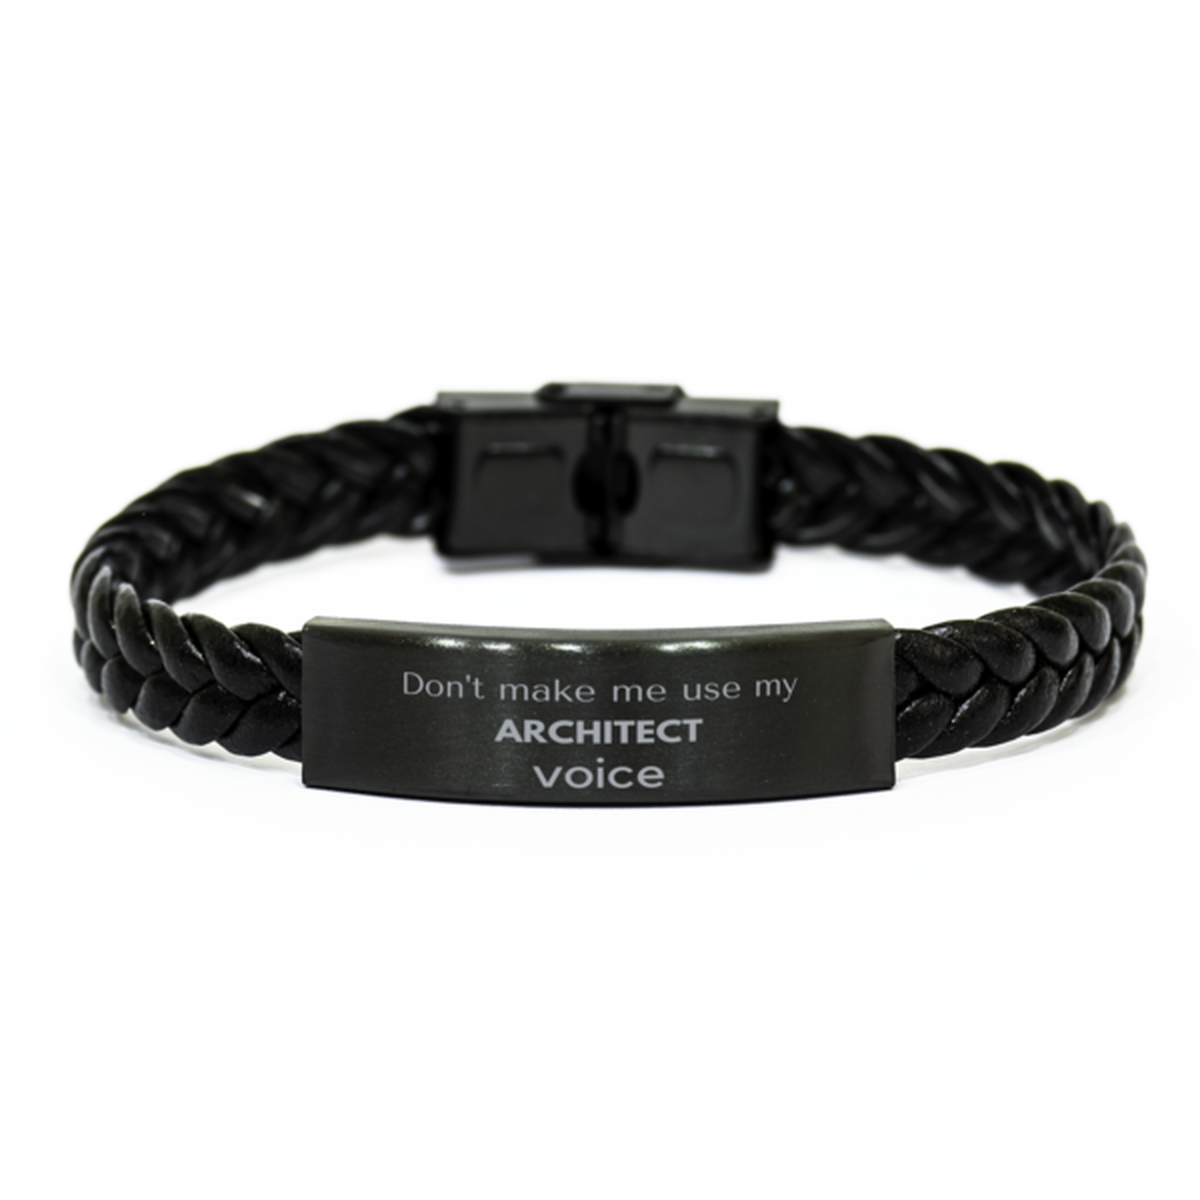 Don't make me use my Architect voice, Sarcasm Architect Gifts, Christmas Architect Braided Leather Bracelet Birthday Unique Gifts For Architect Coworkers, Men, Women, Colleague, Friends